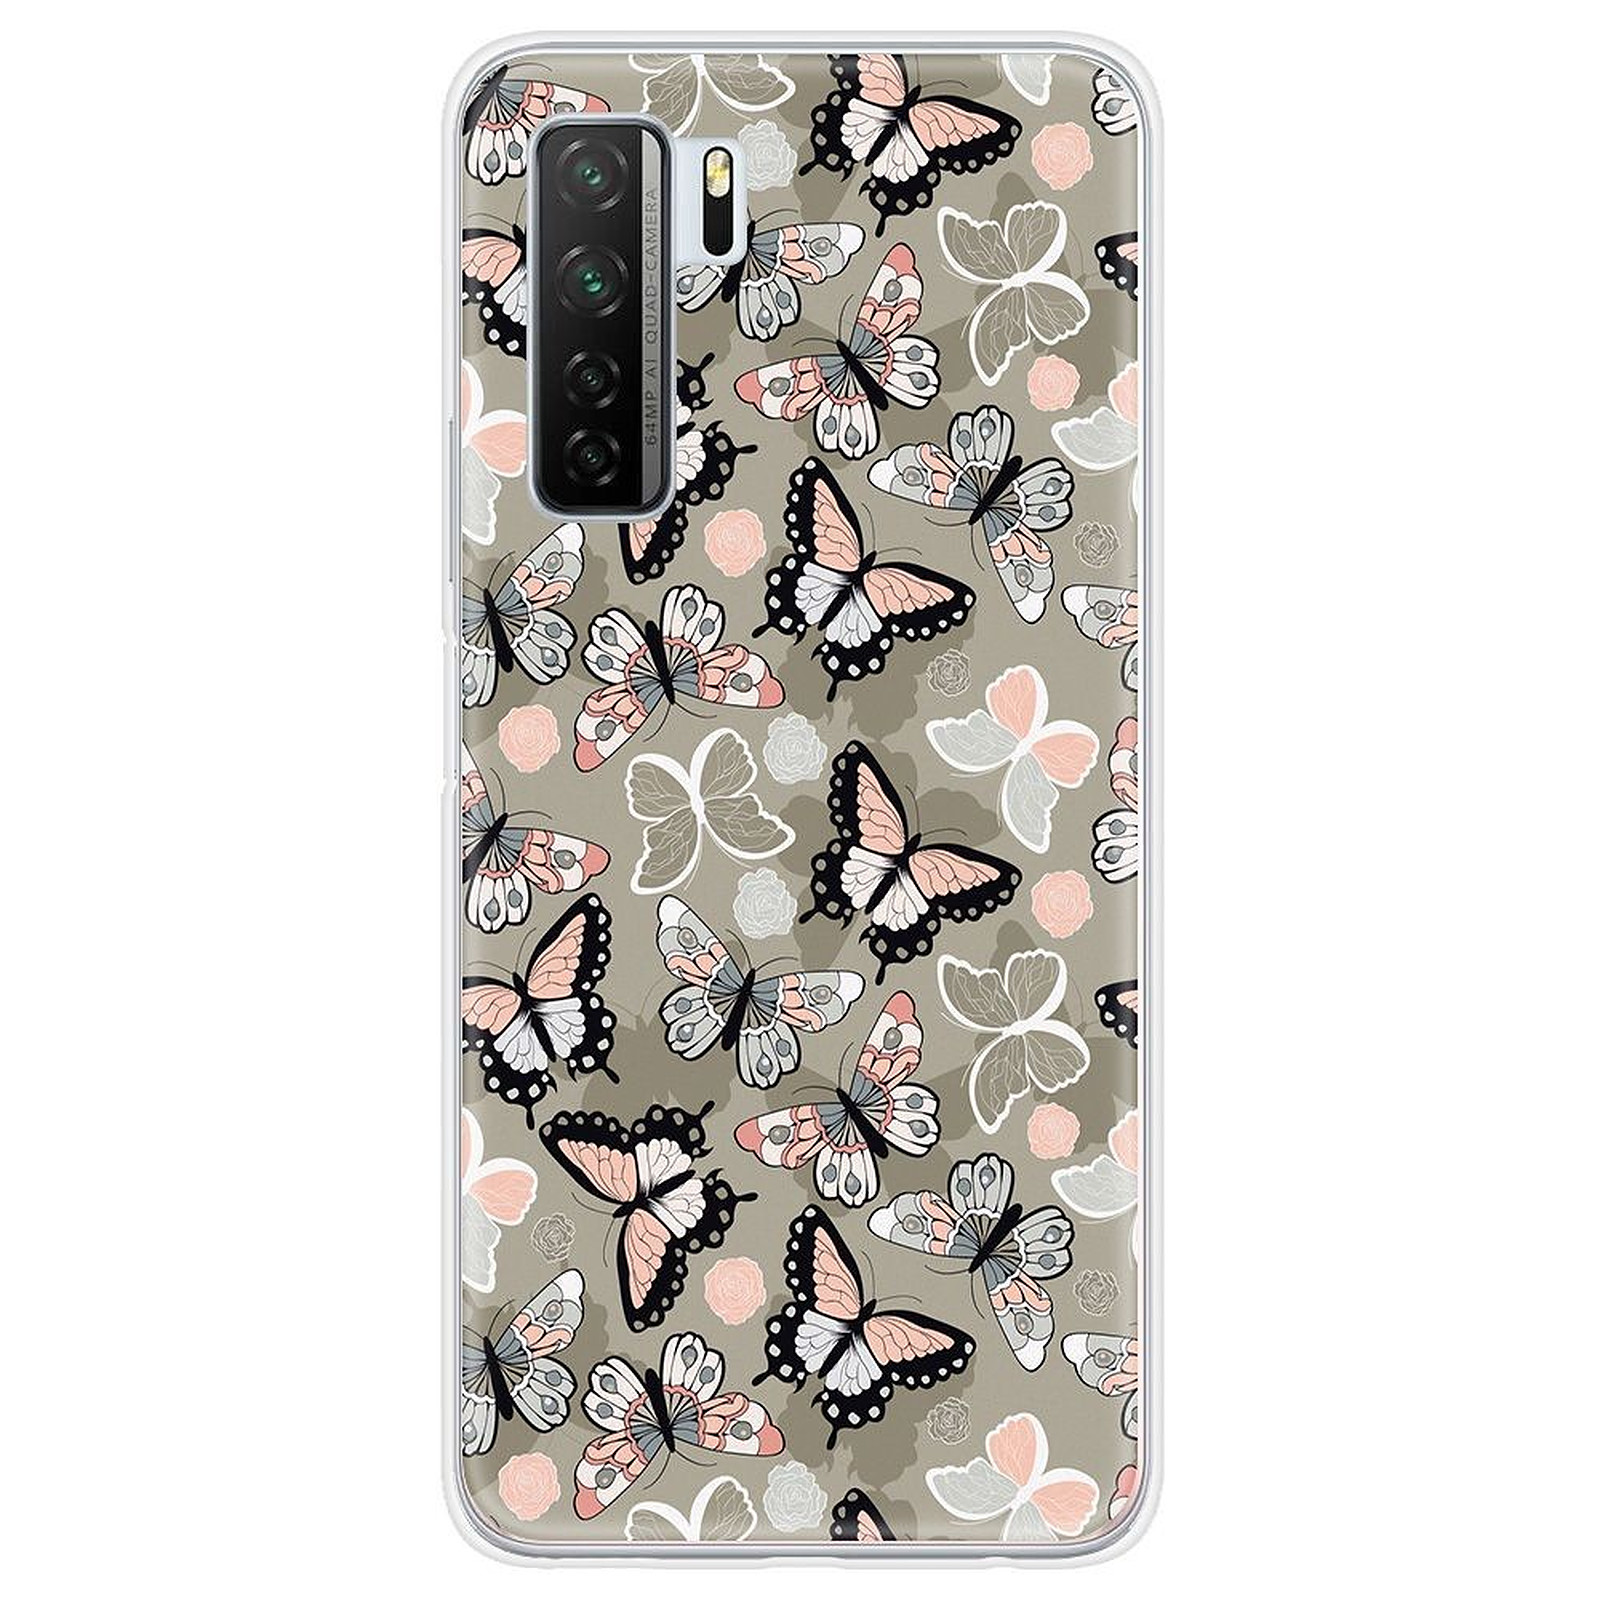 1001 Coques Coque silicone gel Huawei P40 Lite 5G motif Papillons Vintage - Coque telephone 1001Coques